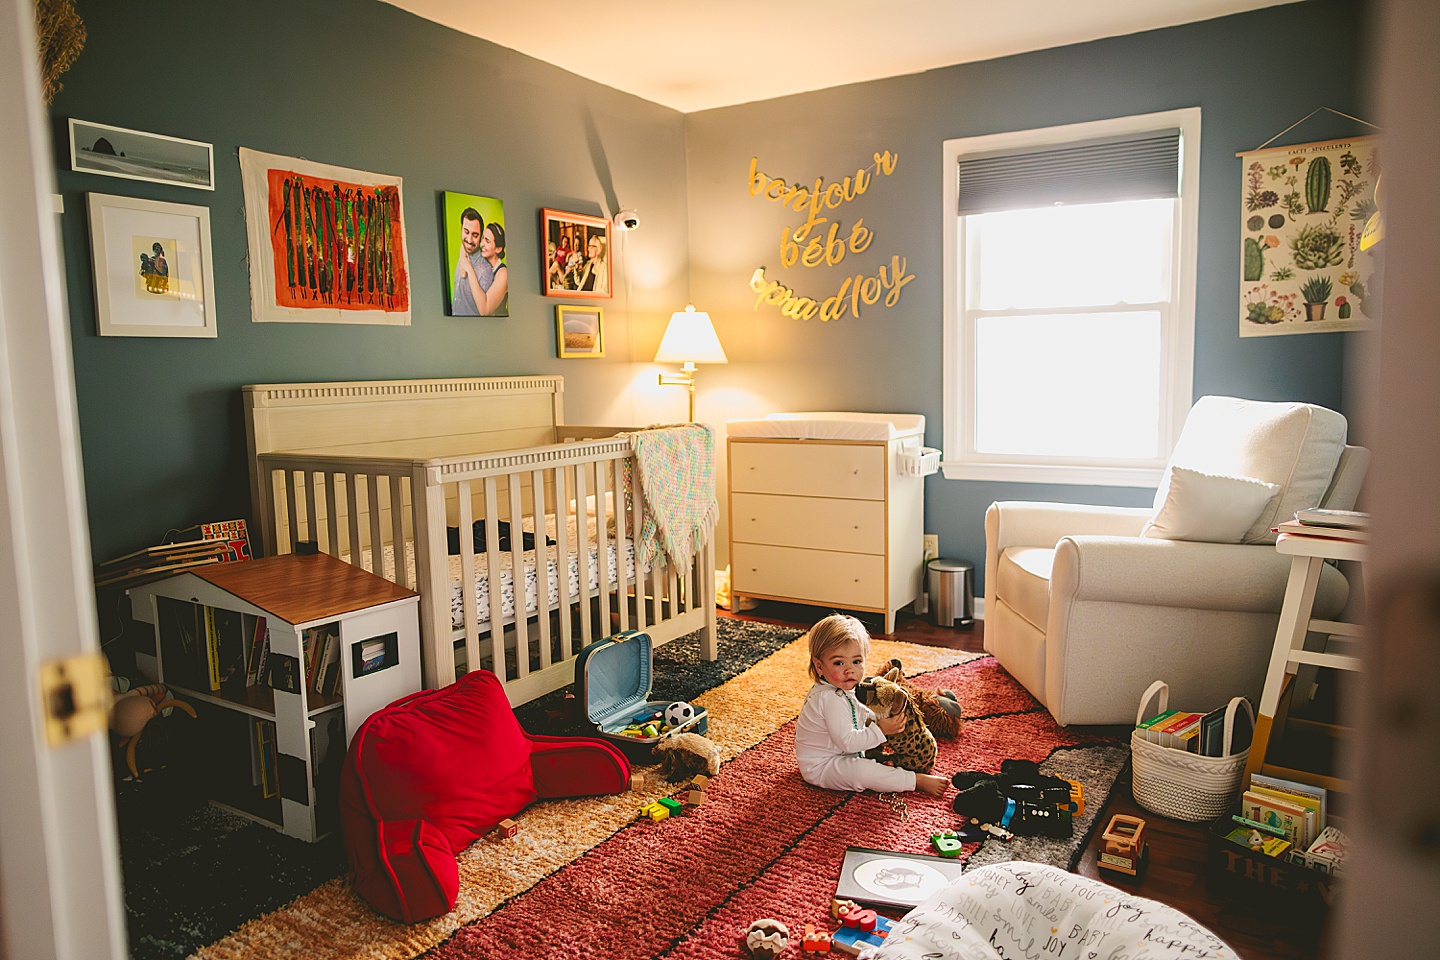 Toddler playing in room